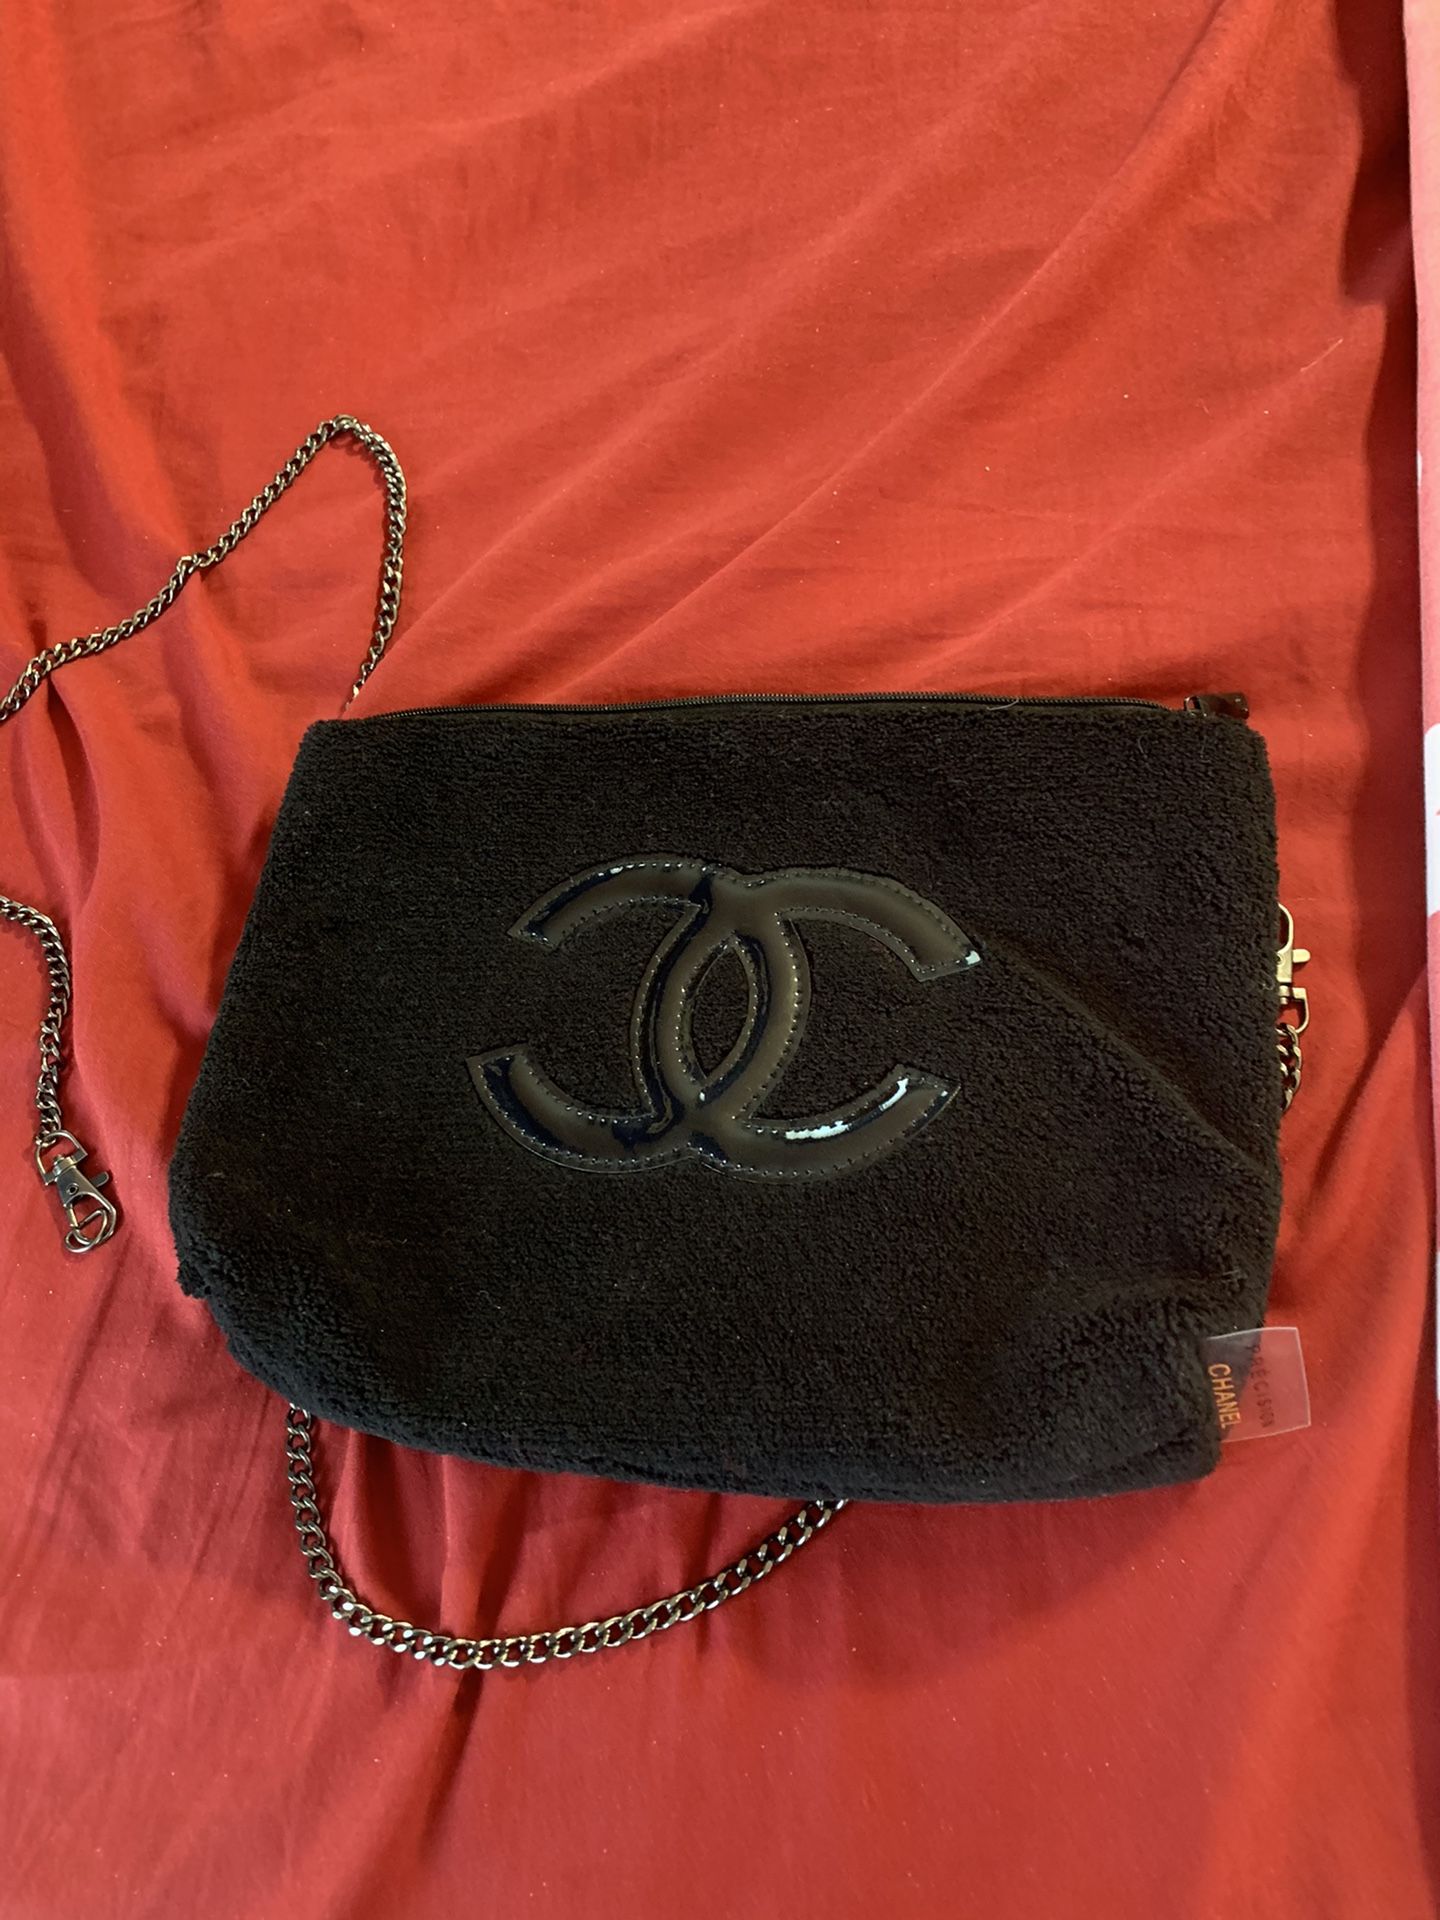 ONLY 2 LEFT* Authentic VIP GIFT Chanel Mesh Tote! for Sale in Oceanside, NY  - OfferUp